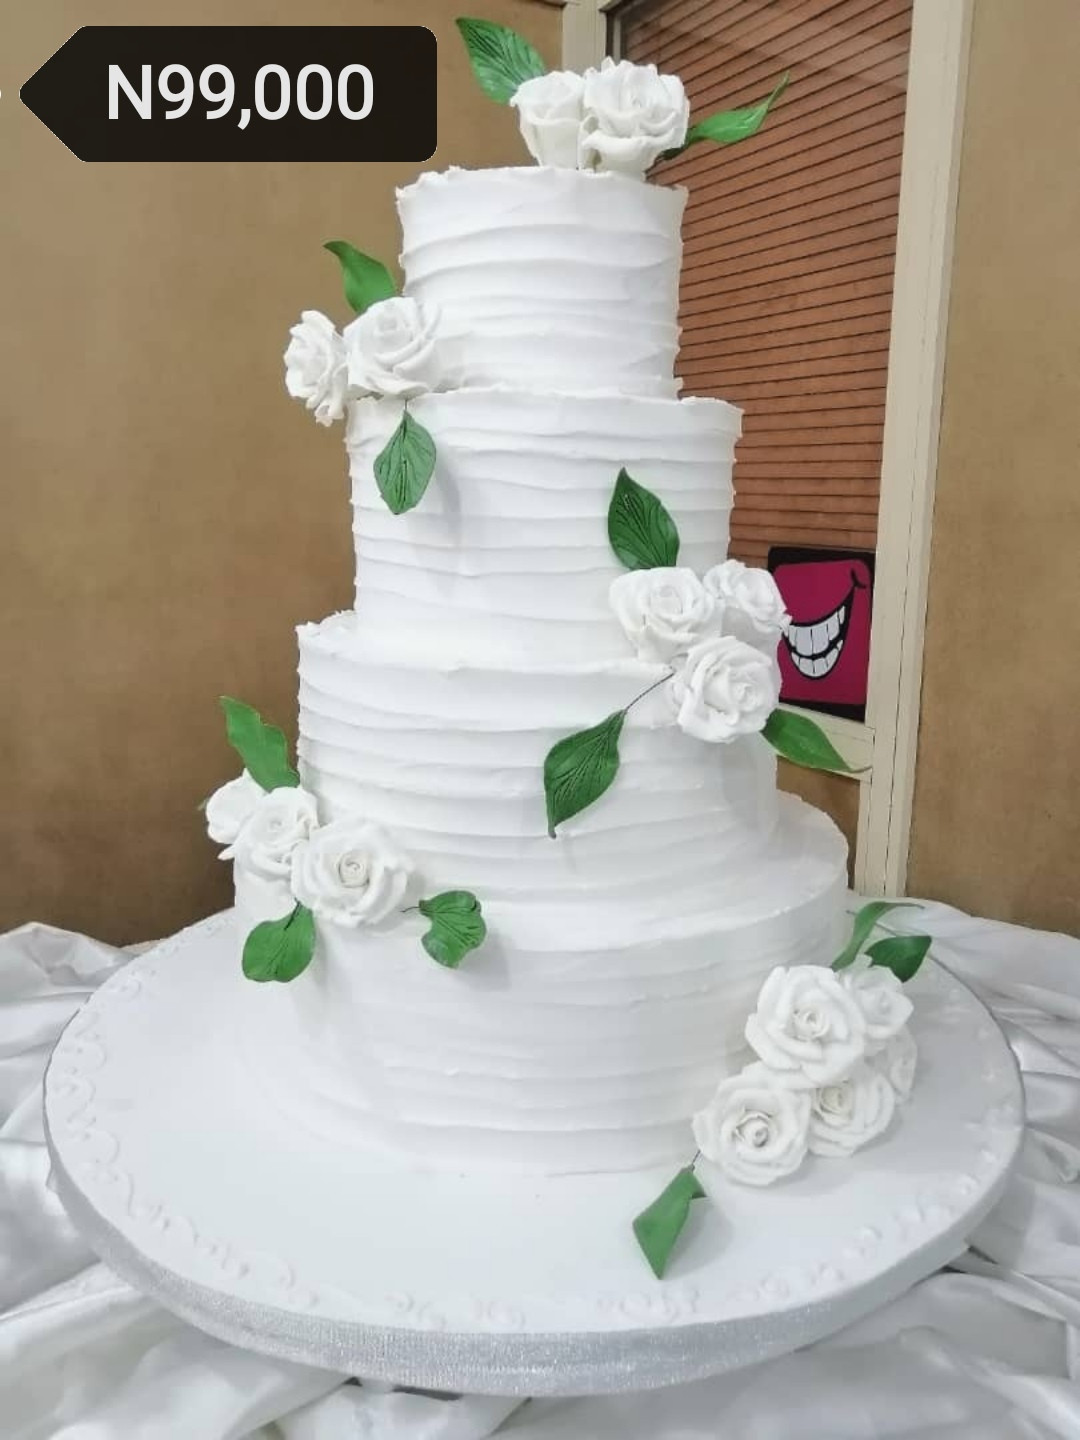 Order your Premium Wedding and Birthday Cakes at Non-premium Prices on the Quickest Online Cake Store in Nigeria brought to you by SayCheese Cakes!